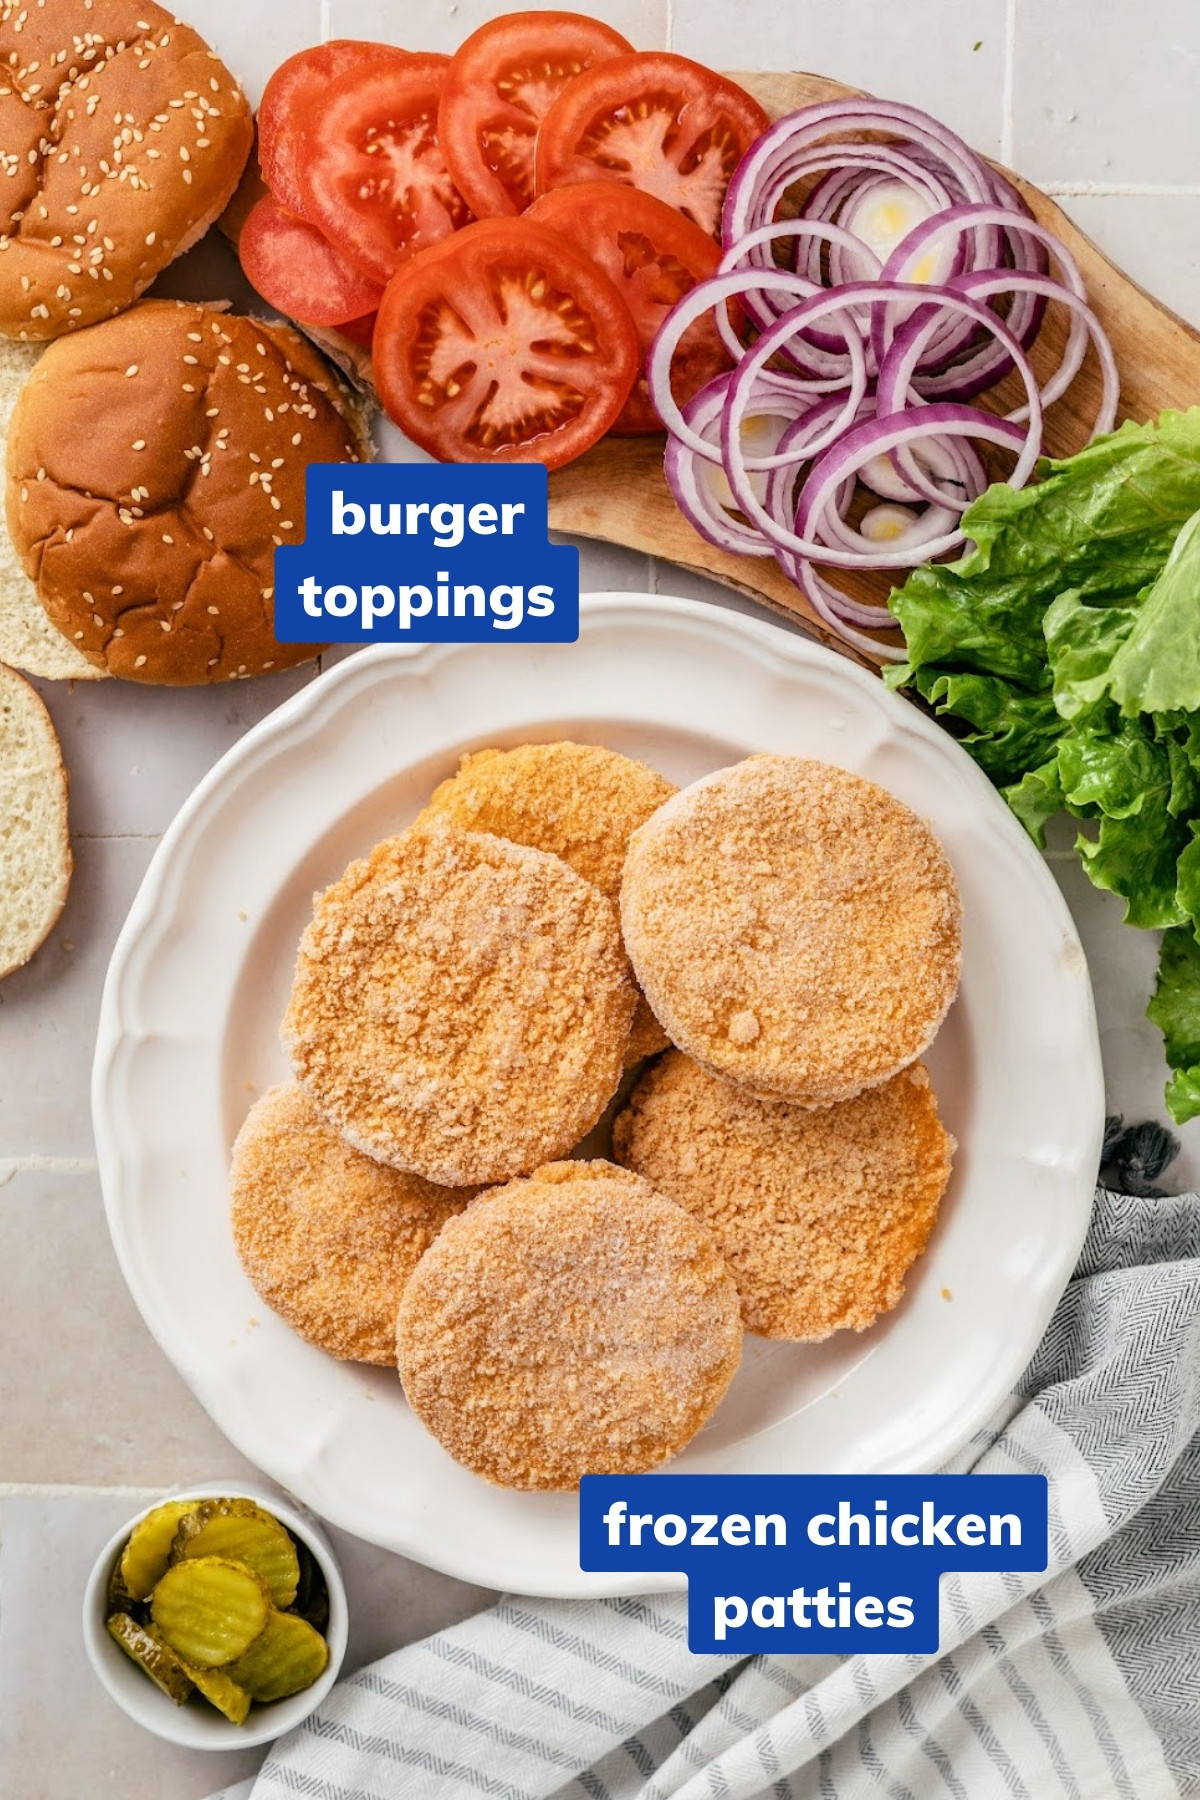 ingredients to make air fryer frozen chicken patties: frozen breaded chicken patties, hamburger buns, red onions, lettuce, pickles, and tomatoes.